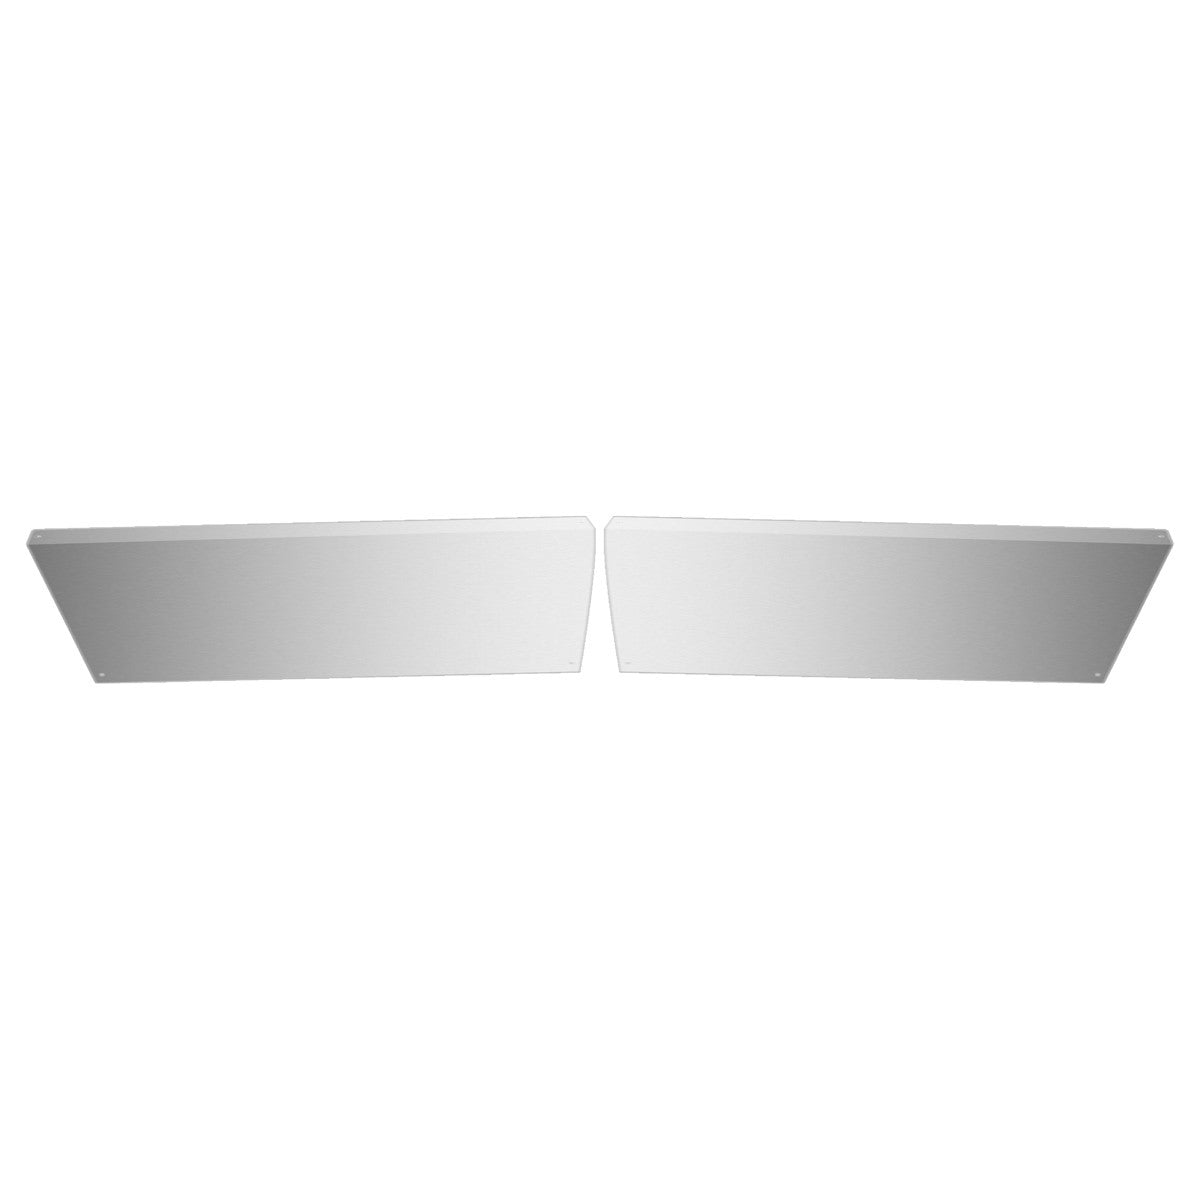 Kenworth T660 Front Kick Plate - Lower Panel